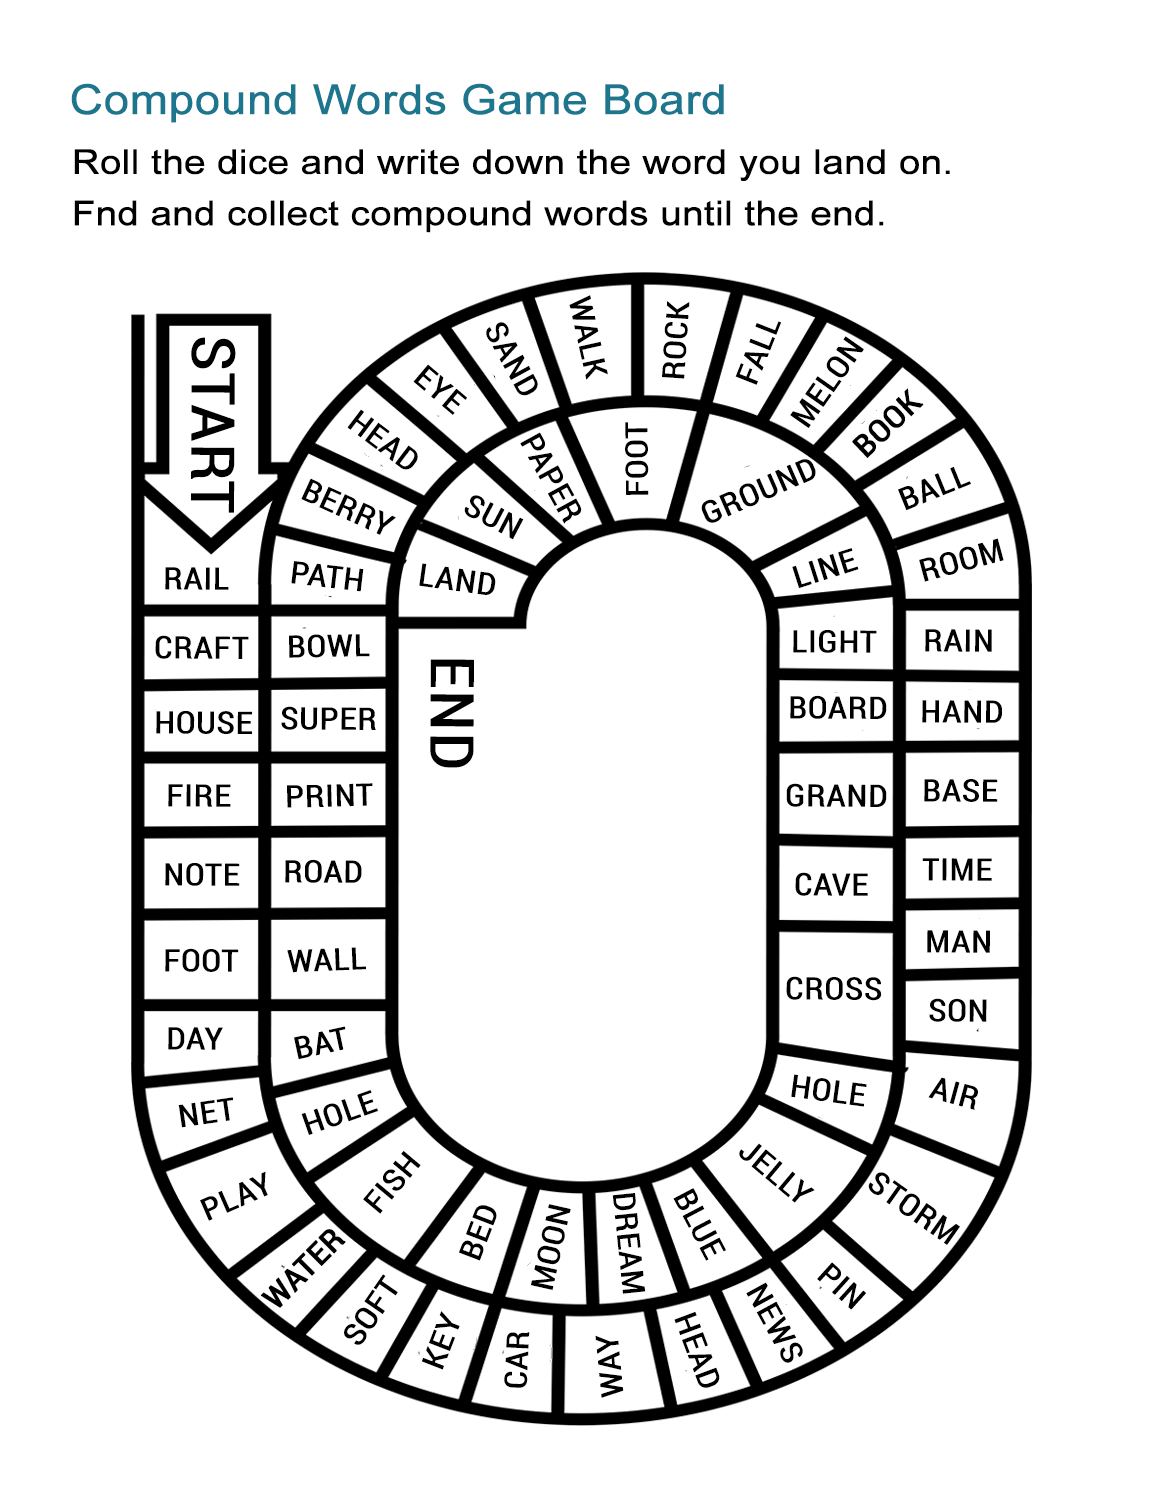 printable-compound-word-games-that-are-inventive-tristan-website